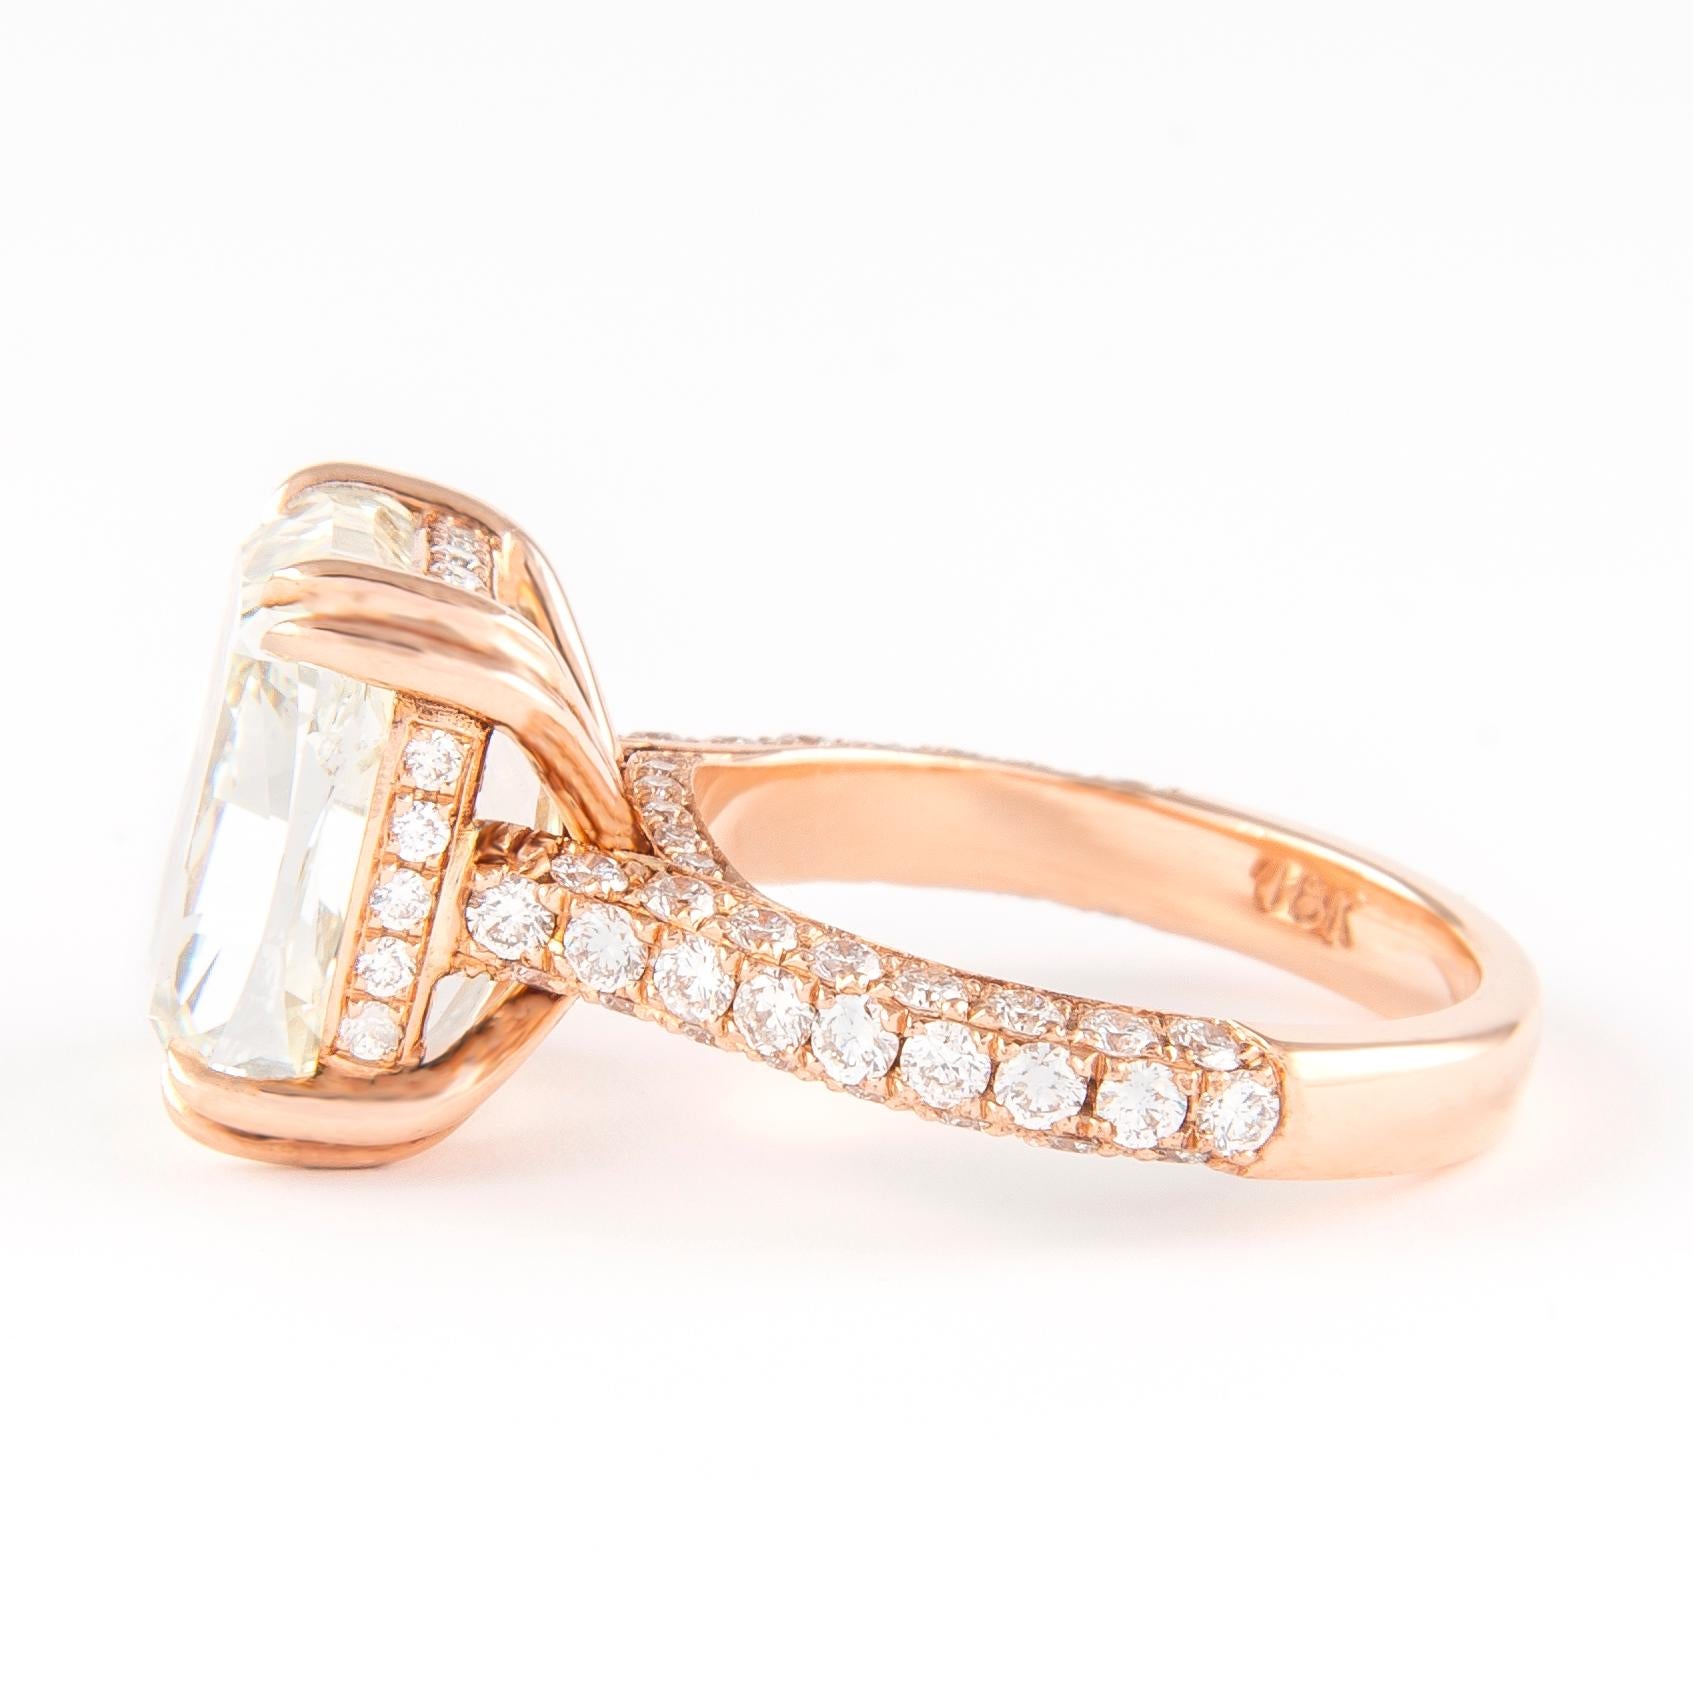 Alexander HRD Certified 10.01ct Cushion Diamond Solitaire Ring 18k Rose Gold In New Condition For Sale In BEVERLY HILLS, CA